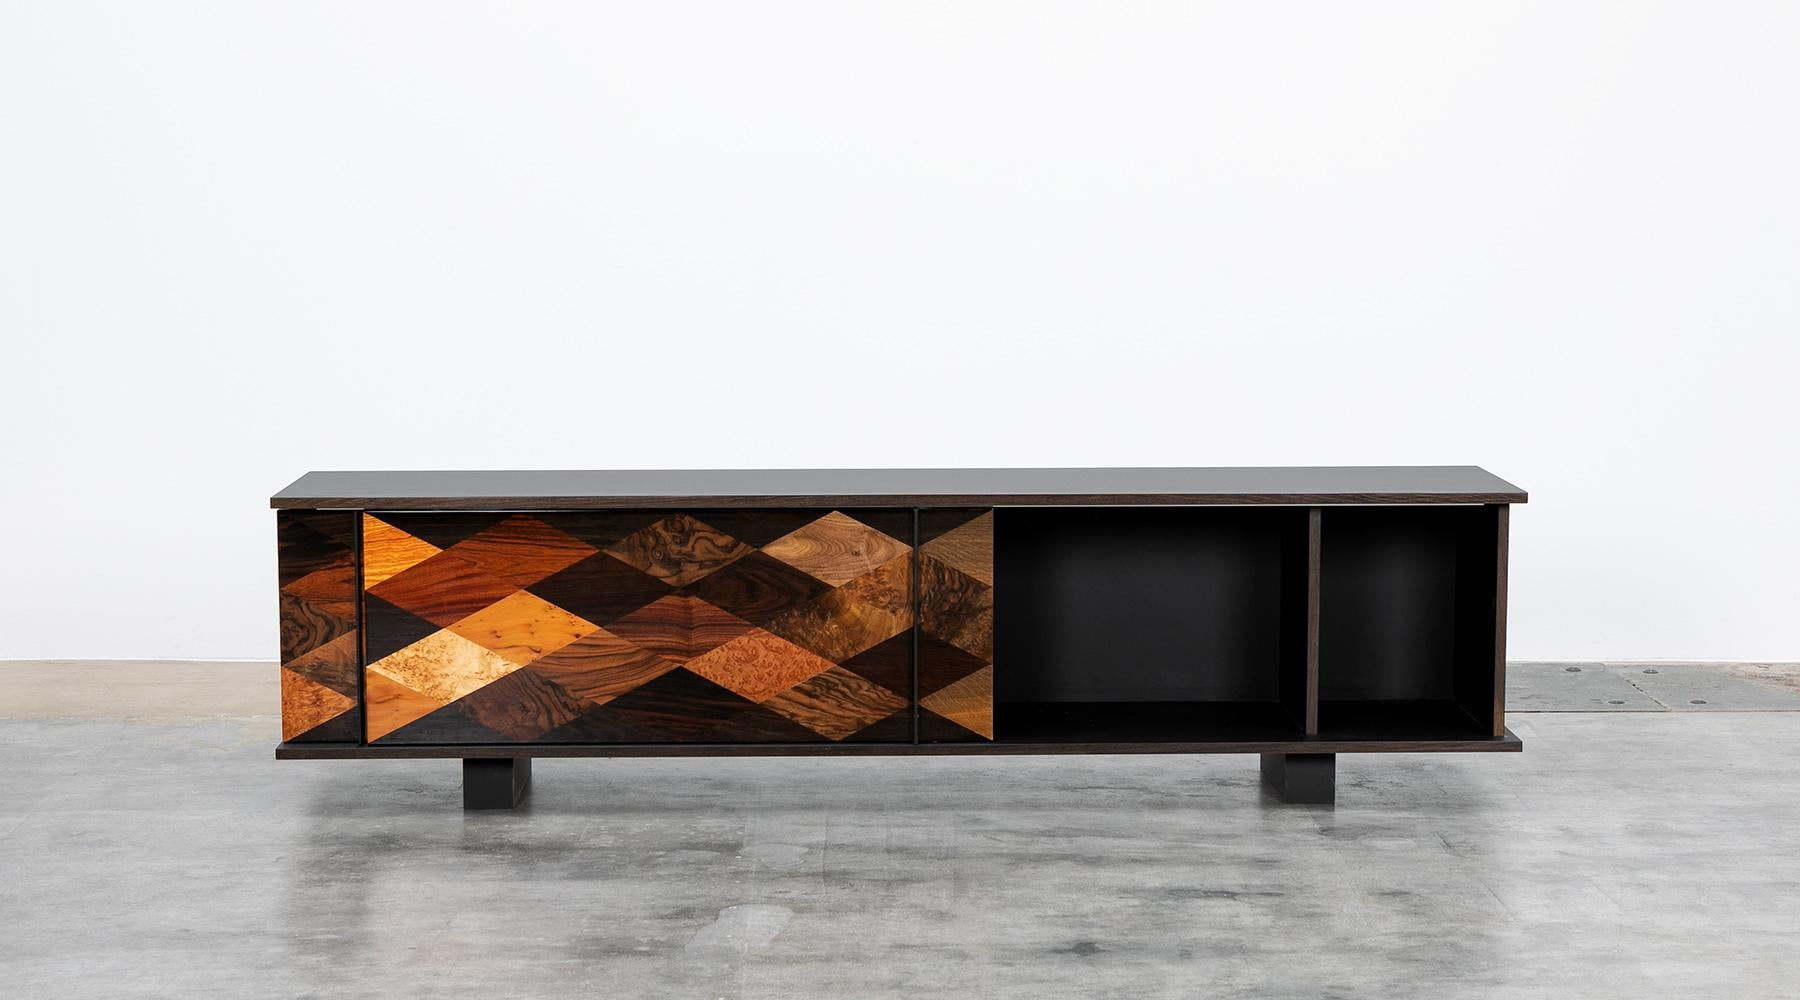 Sideboard by contemporary German artist Johannes Hock. The sliding doors of this unique piece are made of diamond shaped veneers of various origin such as maple, ebony, yew, walnut, rosewood, Makassar, poplar, oak and more. The body is made of black